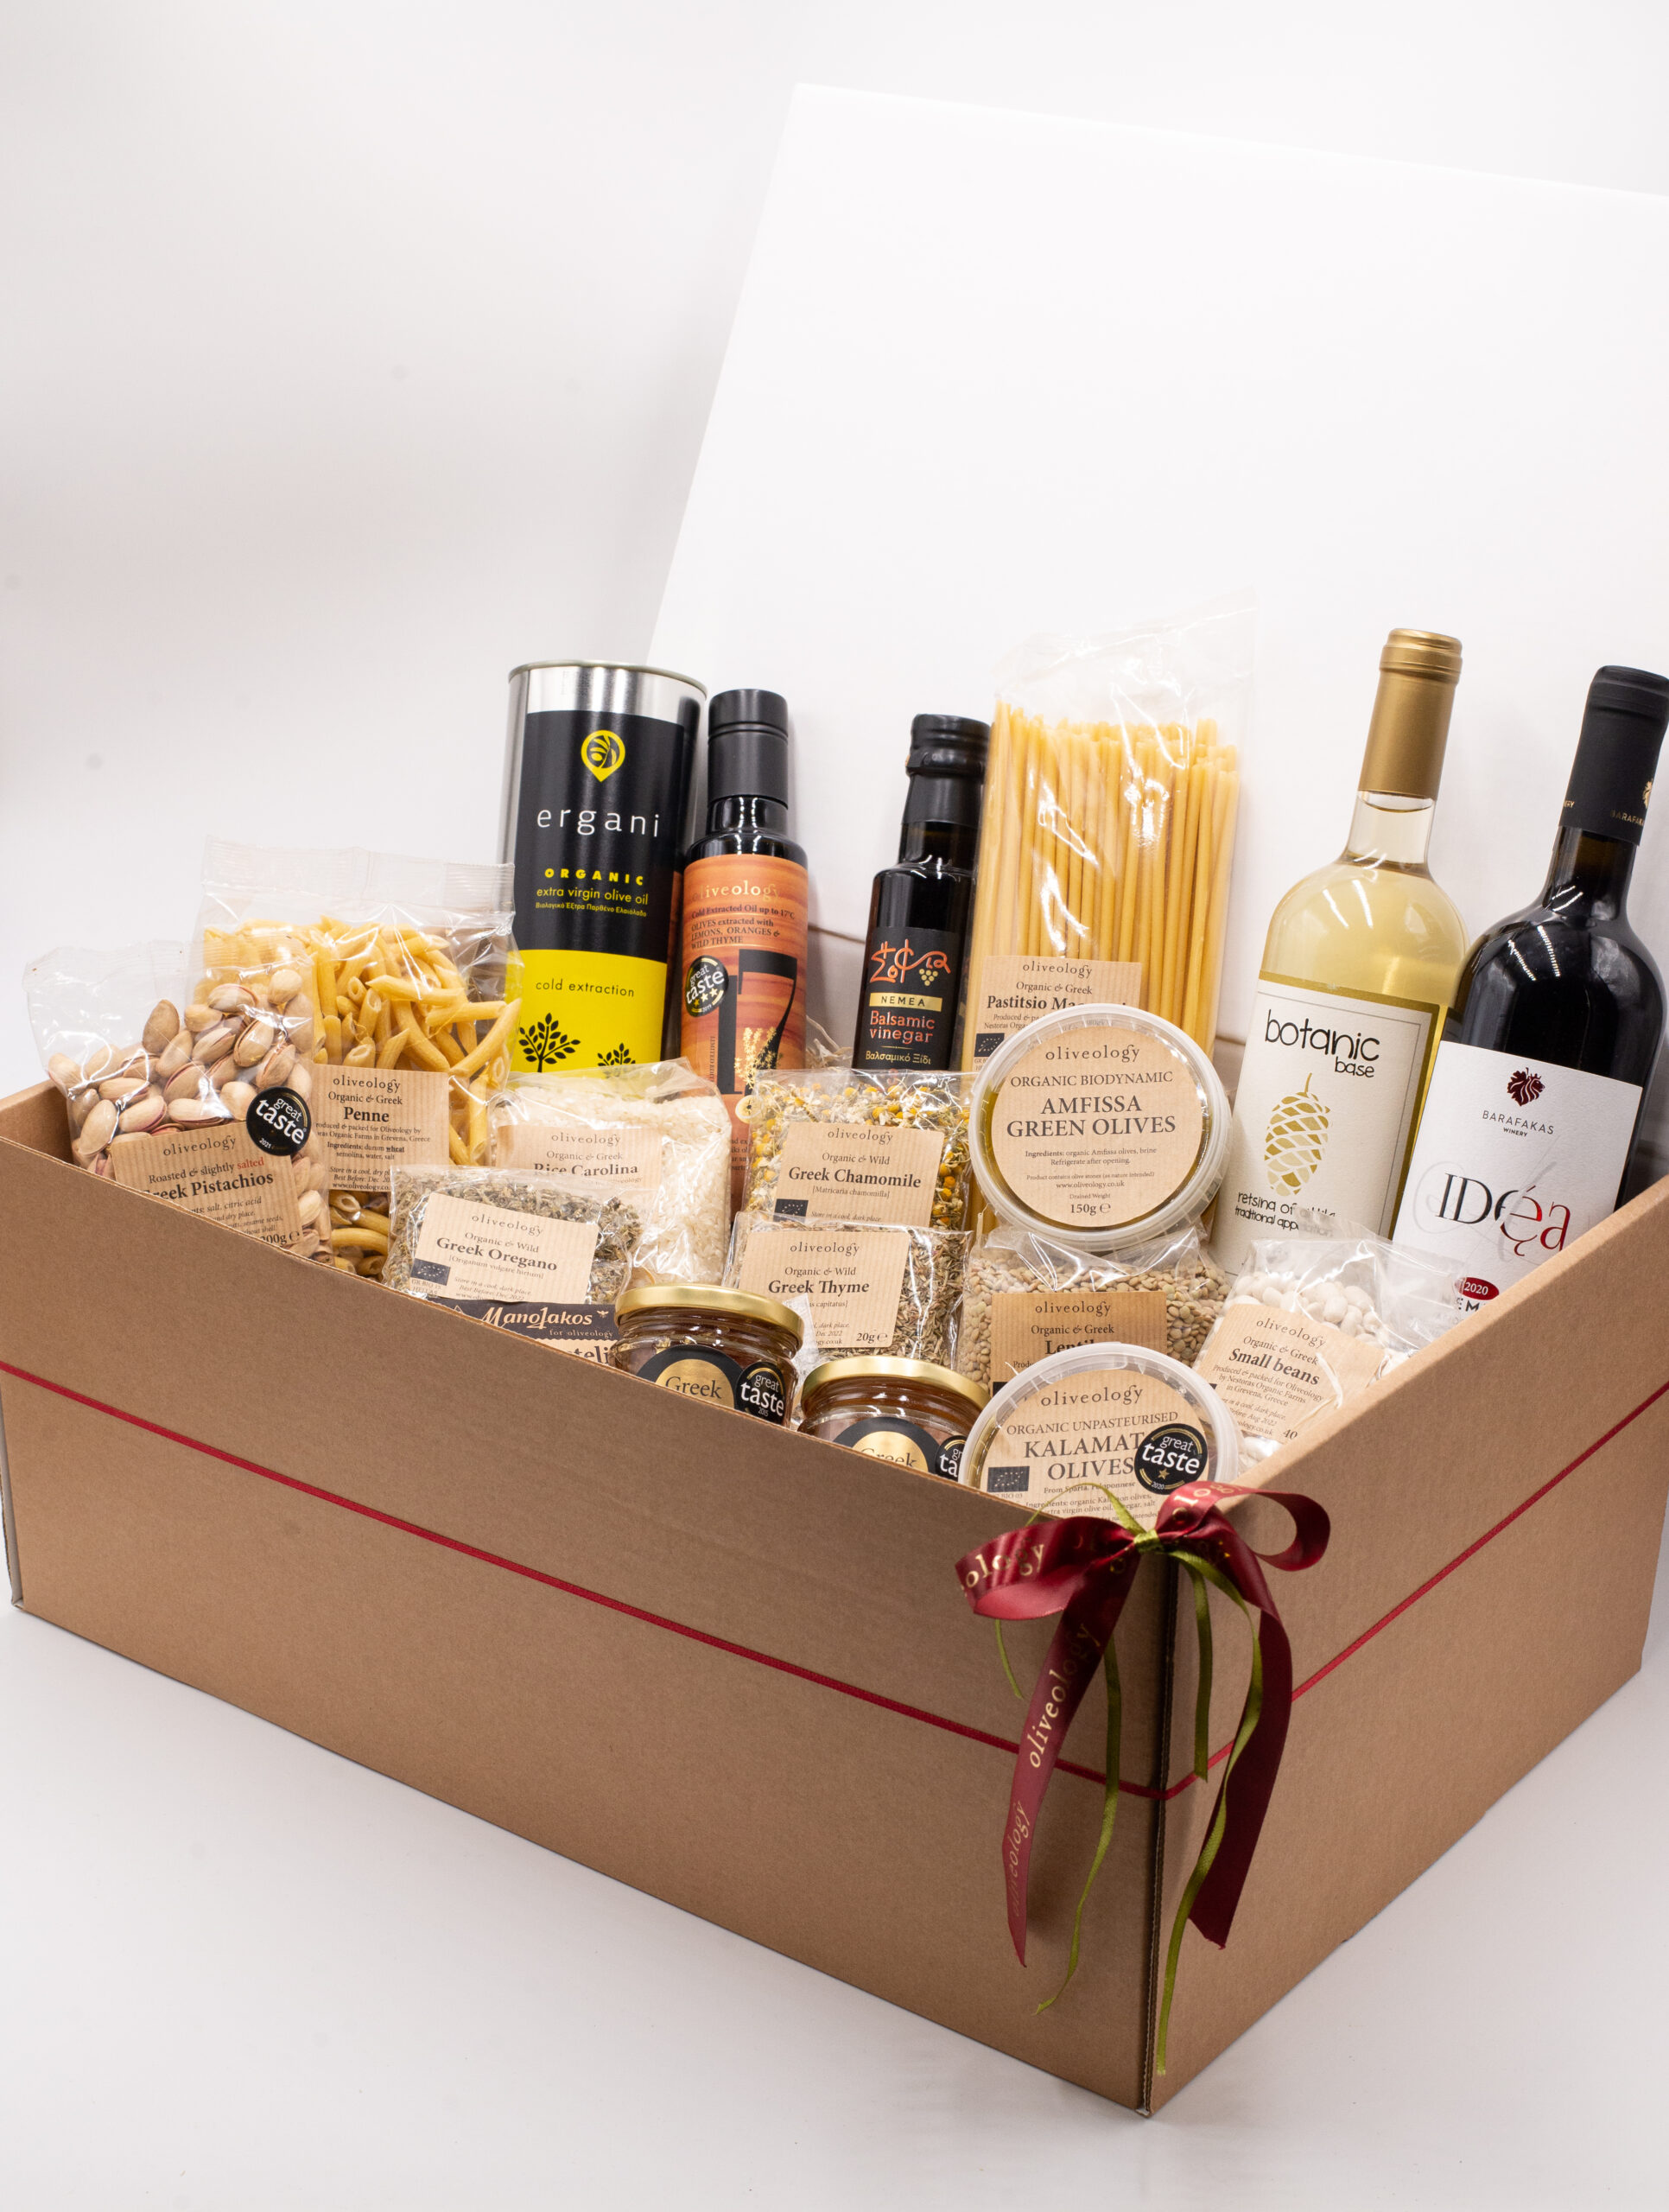 The Everything Hamper – Oliveology Organic Artisan Products